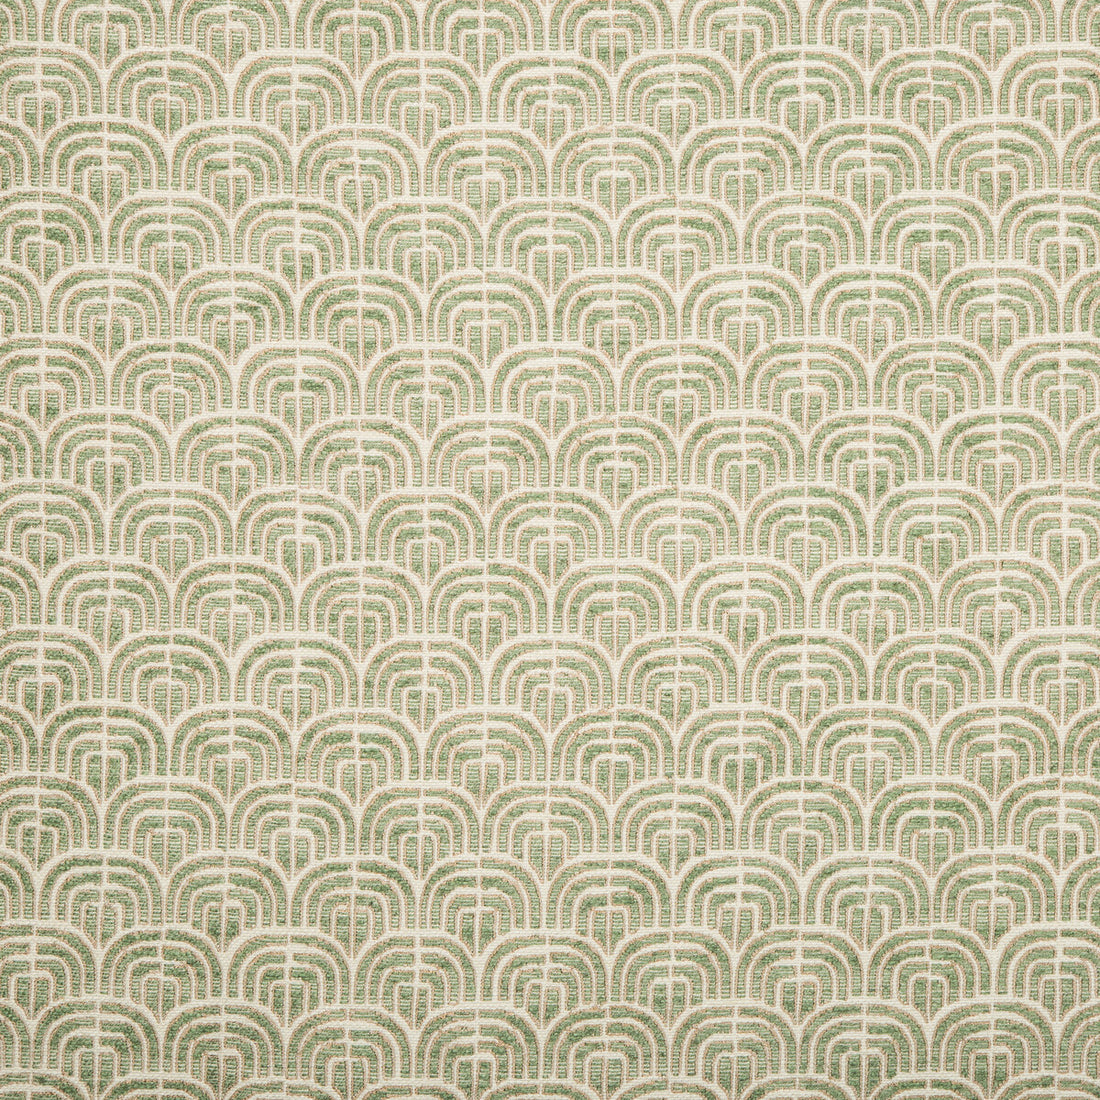 Bale fabric in moss color - pattern 2019155.3.0 - by Lee Jofa in the Carrier And Company collection